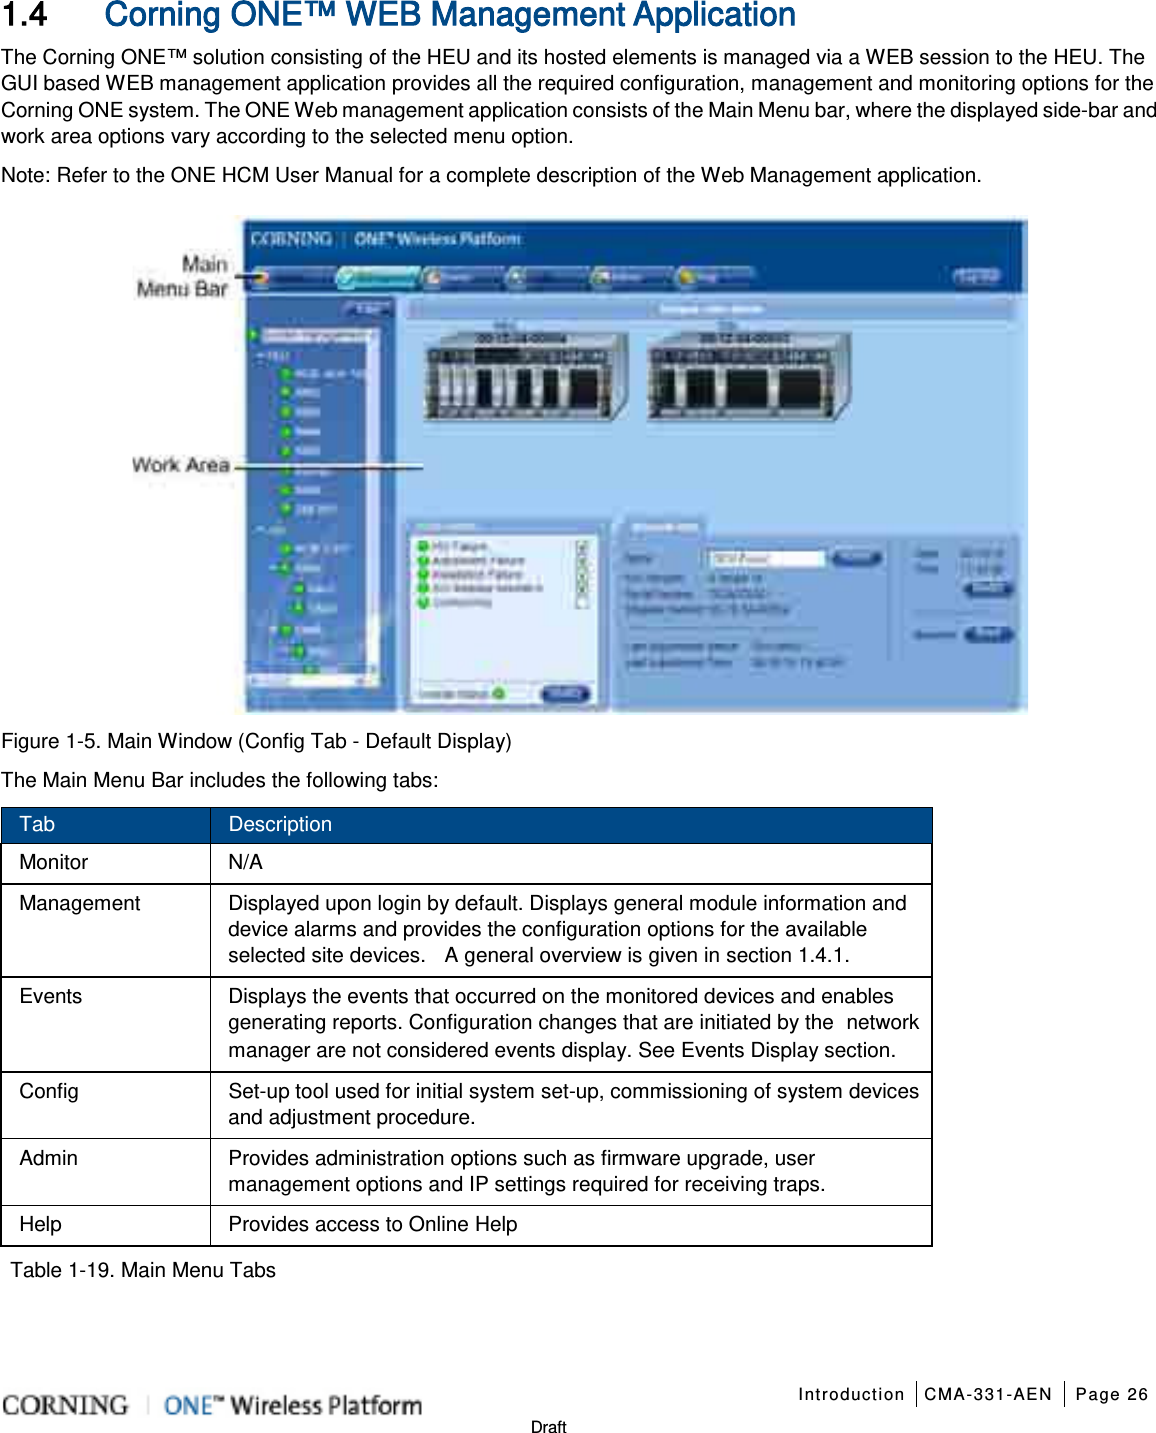   Introduction CMA-331-AEN Page 26   Draft 1.4 Corning ONE™ WEB Management Application The Corning ONE™ solution consisting of the HEU and its hosted elements is managed via a WEB session to the HEU. The GUI based WEB management application provides all the required configuration, management and monitoring options for the Corning ONE system. The ONE Web management application consists of the Main Menu bar, where the displayed side-bar and work area options vary according to the selected menu option.   Note: Refer to the ONE HCM User Manual for a complete description of the Web Management application.    Figure  1-5. Main Window (Config Tab - Default Display) The Main Menu Bar includes the following tabs: Tab Description Monitor N/A Management Displayed upon login by default. Displays general module information and device alarms and provides the configuration options for the available selected site devices.  A general overview is given in section  1.4.1.   Events Displays the events that occurred on the monitored devices and enables generating reports. Configuration changes that are initiated by the network manager are not considered events display. See Events Display section. Config Set-up tool used for initial system set-up, commissioning of system devices and adjustment procedure.   Admin Provides administration options such as firmware upgrade, user management options and IP settings required for receiving traps. Help Provides access to Online Help    Table  1-19. Main Menu Tabs   